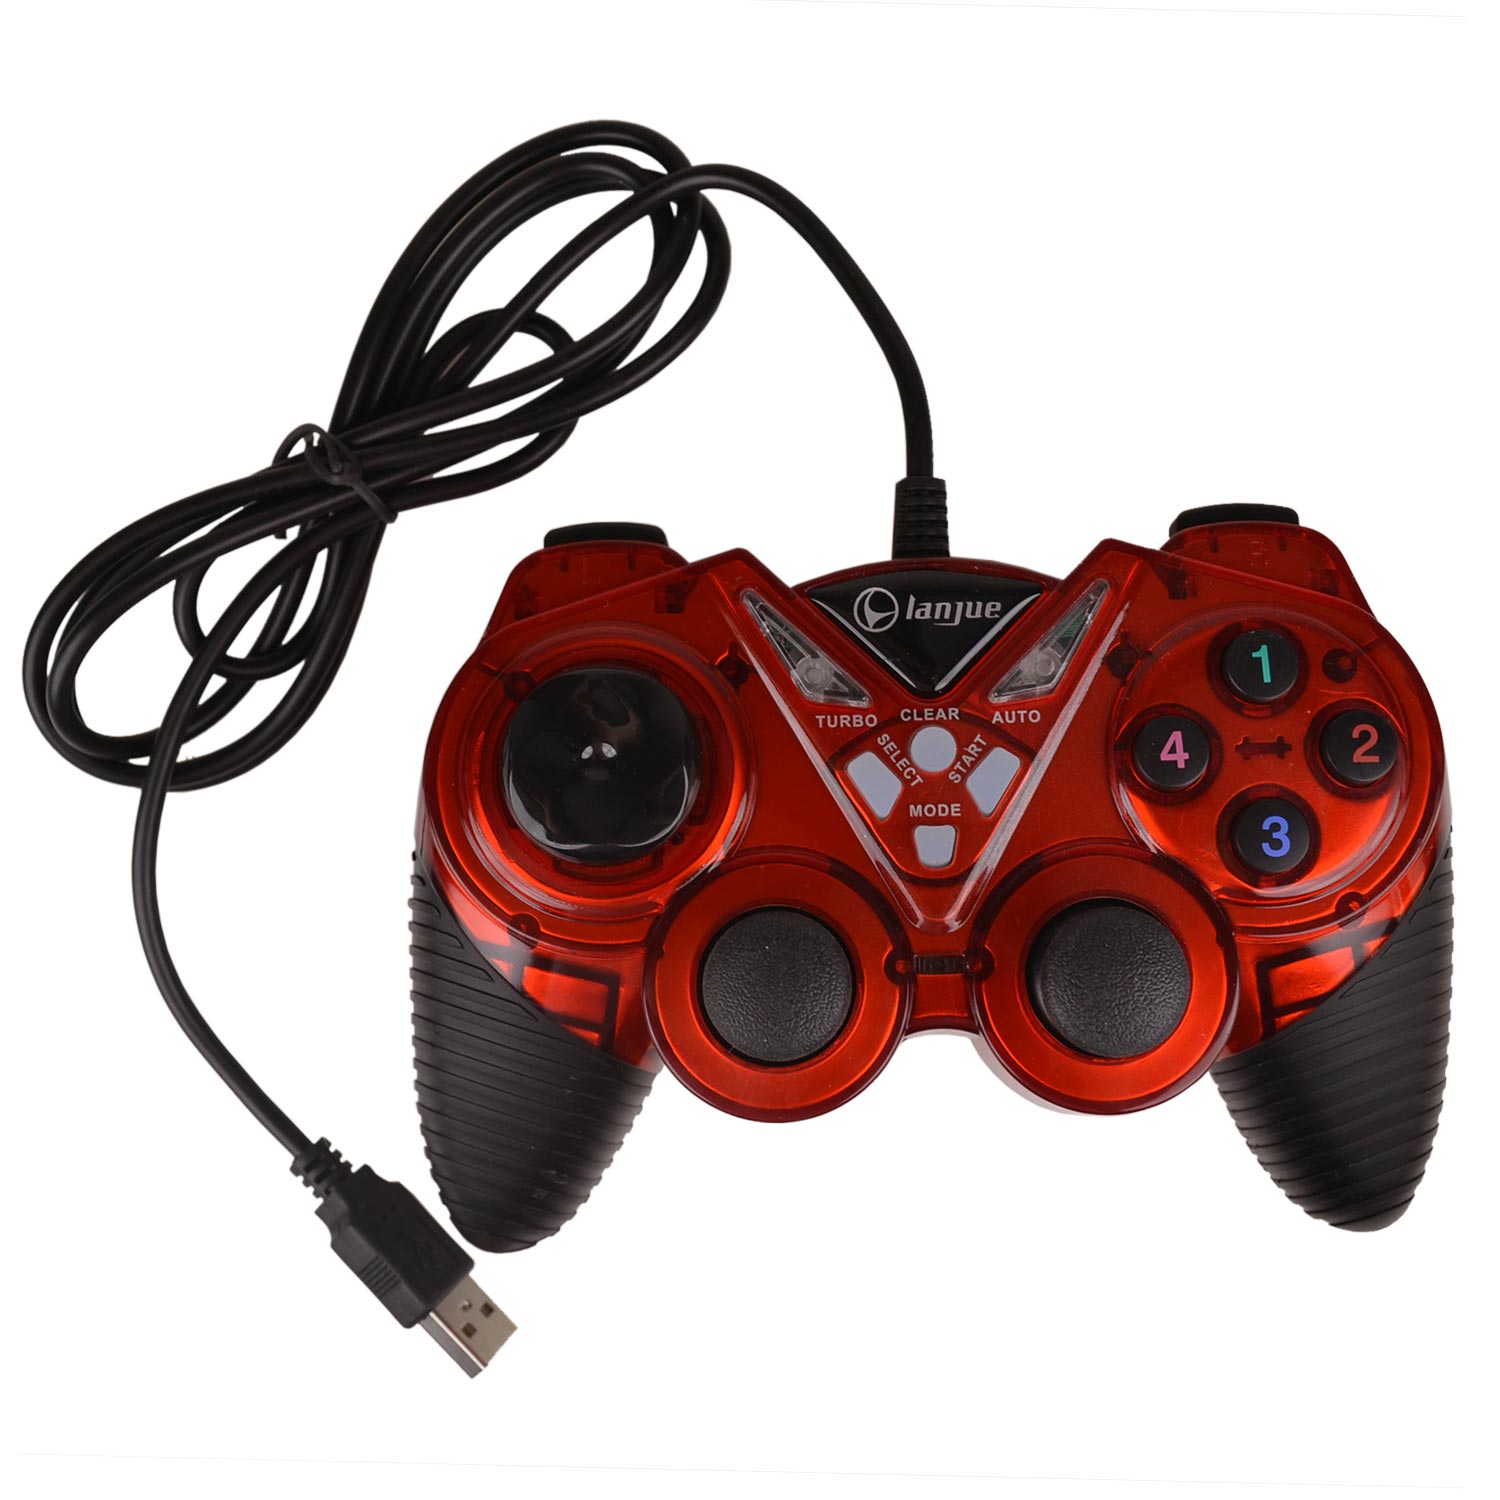 Usb L2000 Double Shock Usb Game Controller